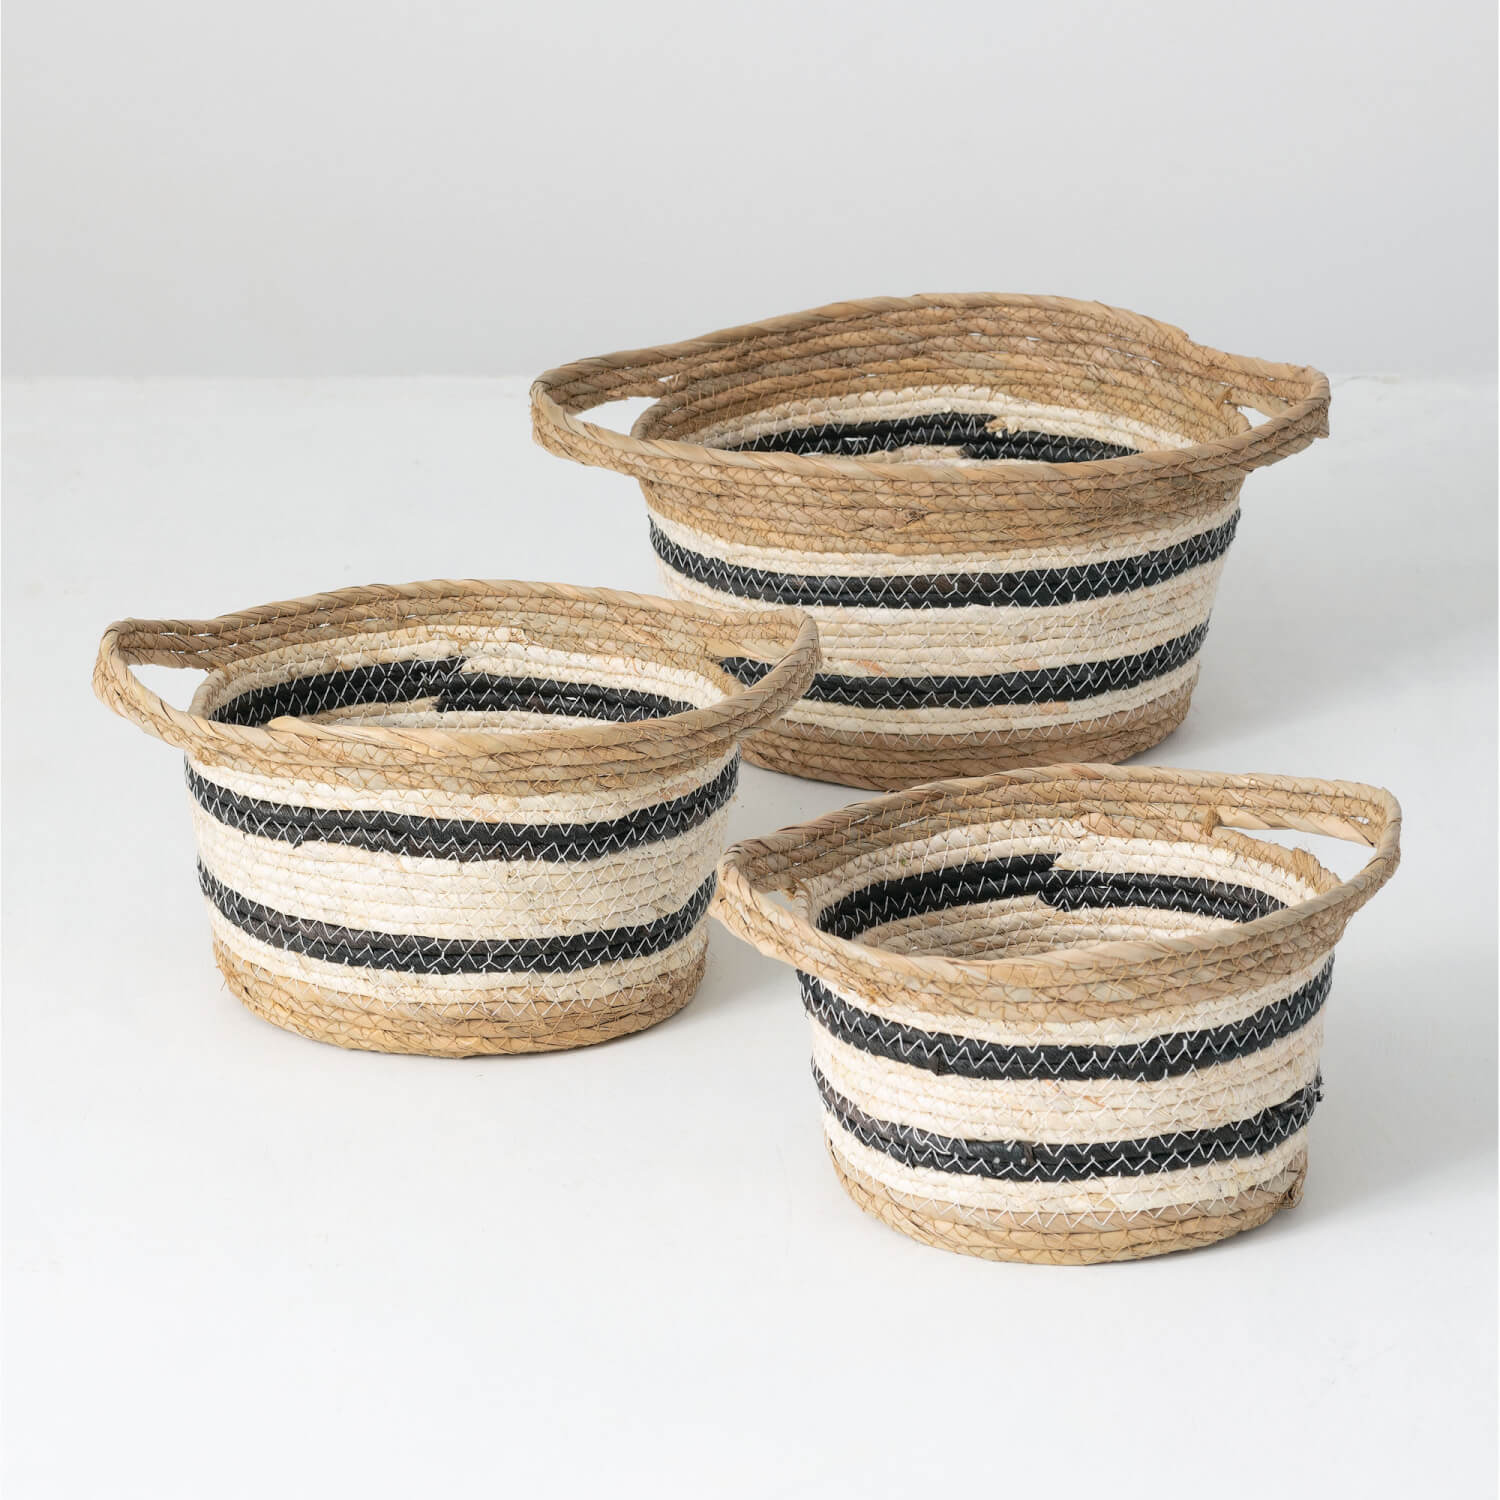 small, medium, and large baskets on white background. baskets are made from natural colored seagrass and white and blue rope woven and stitched together.